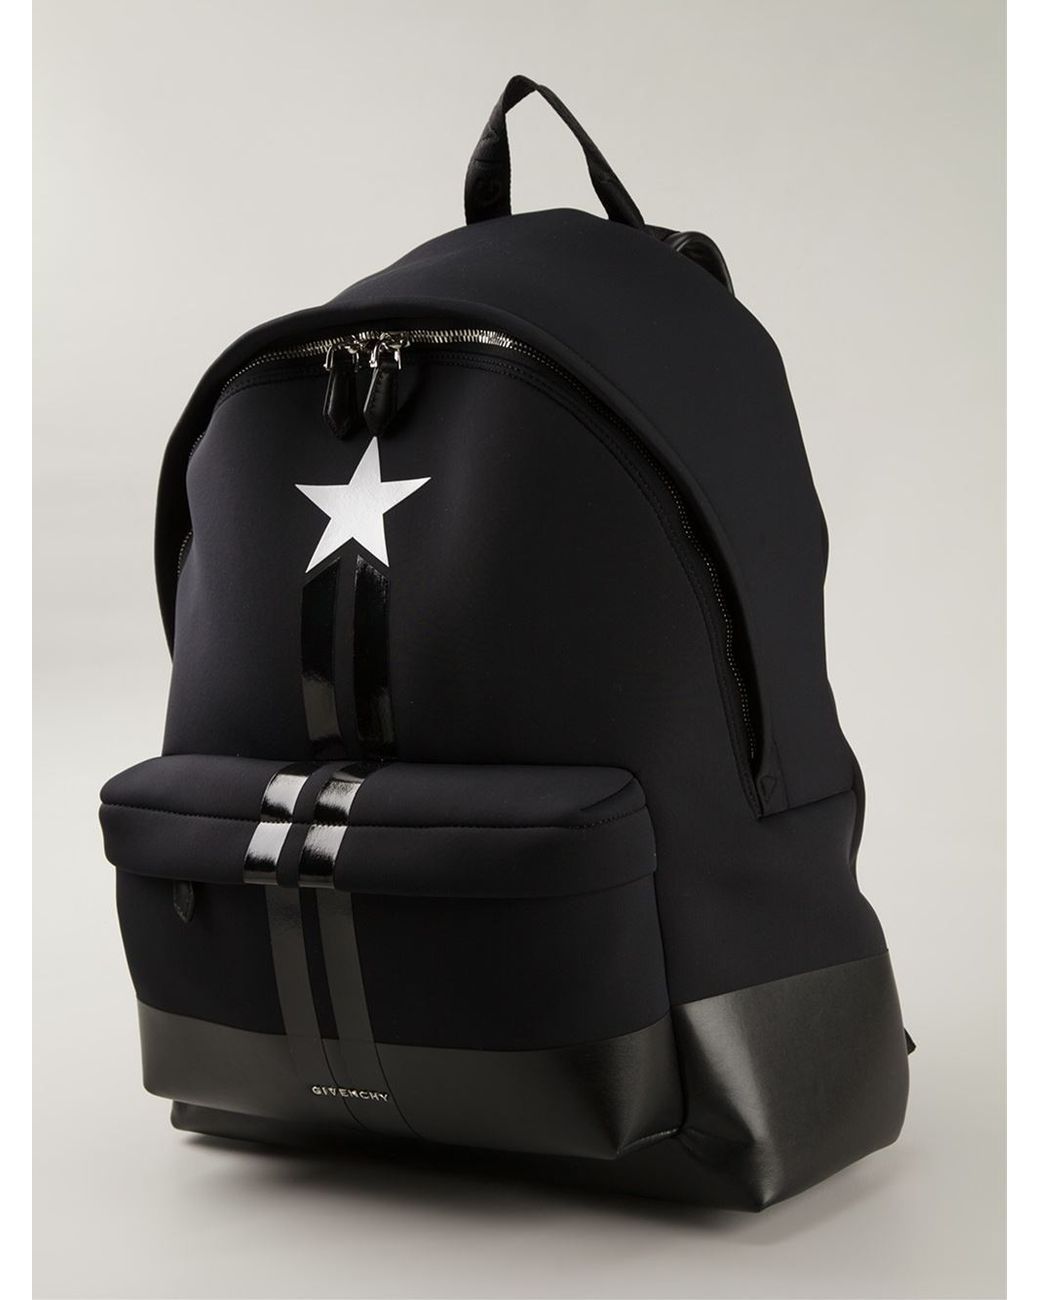 Givenchy Star Print Backpack in Black | Lyst